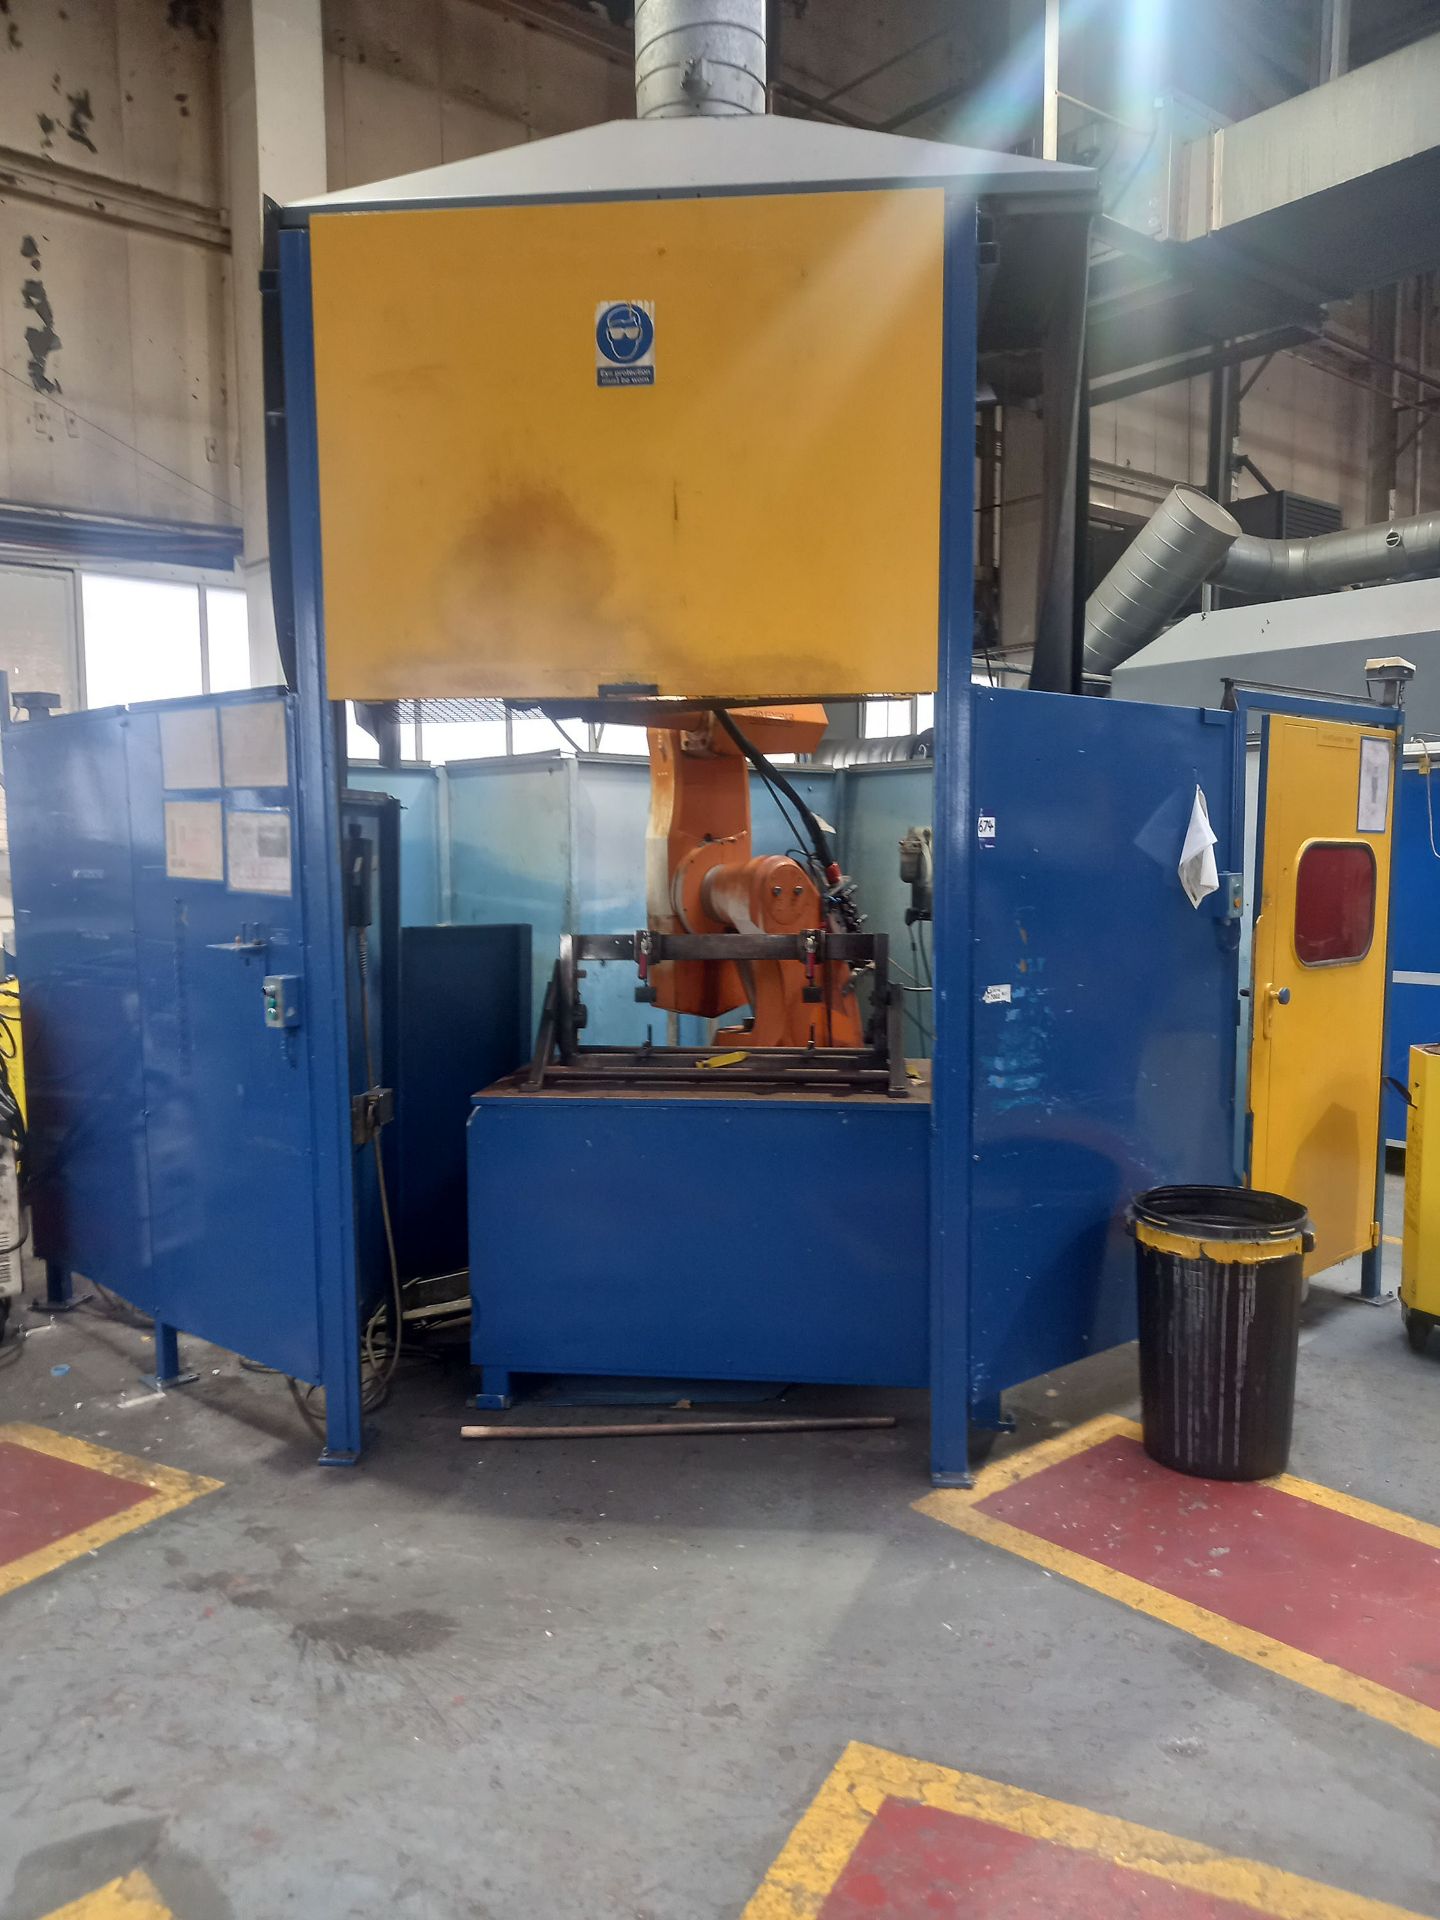 Cloos ROMAT 310 Two Position Robotic Welding Cell Serial No: 3327.882T03 (2000) with Cloos Welding R